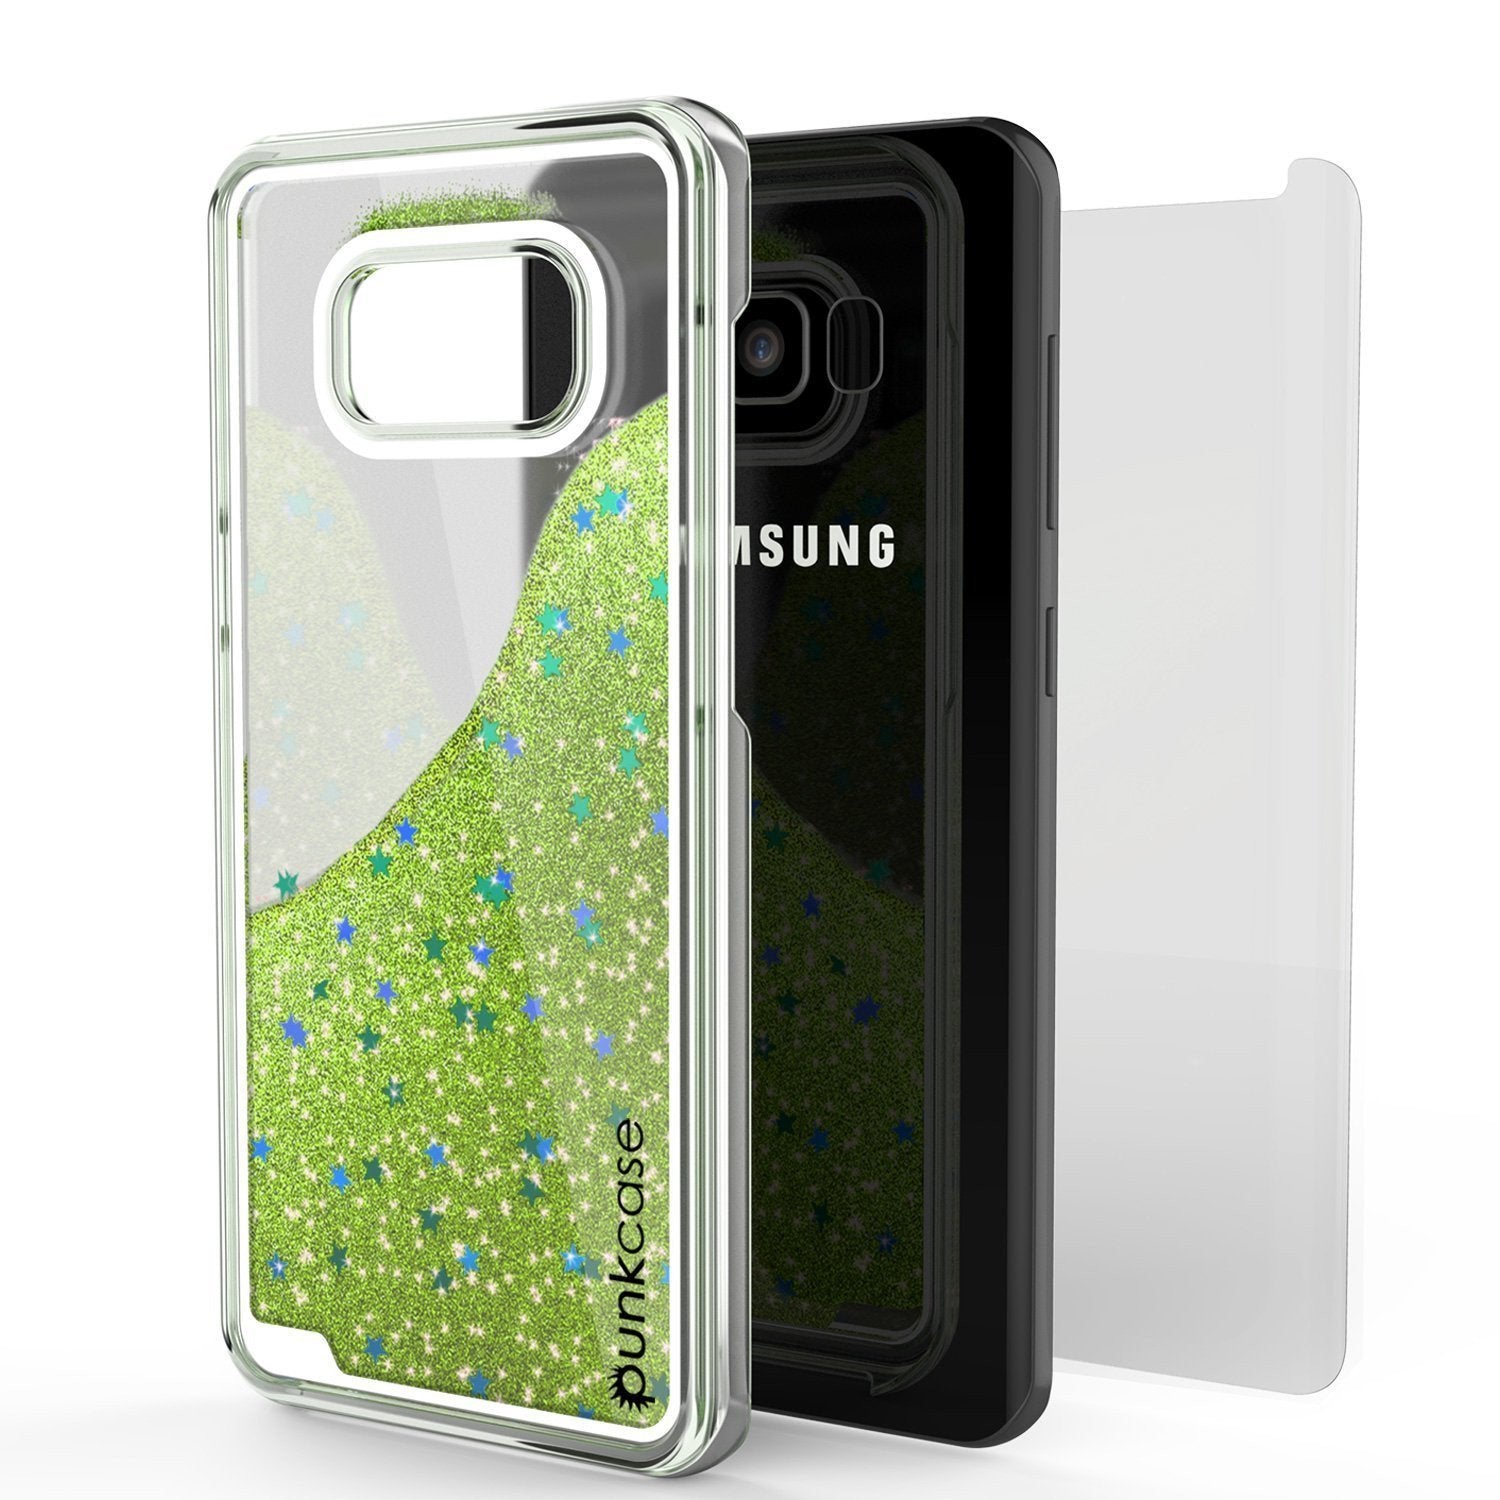 S8 Plus Case, Punkcase [Liquid Series] Protective Dual Layer Floating Glitter Cover with lots of Bling & Sparkle + PunkShield Screen Protector for Samsungs Galaxy S8+ (Light Green] - PunkCase NZ